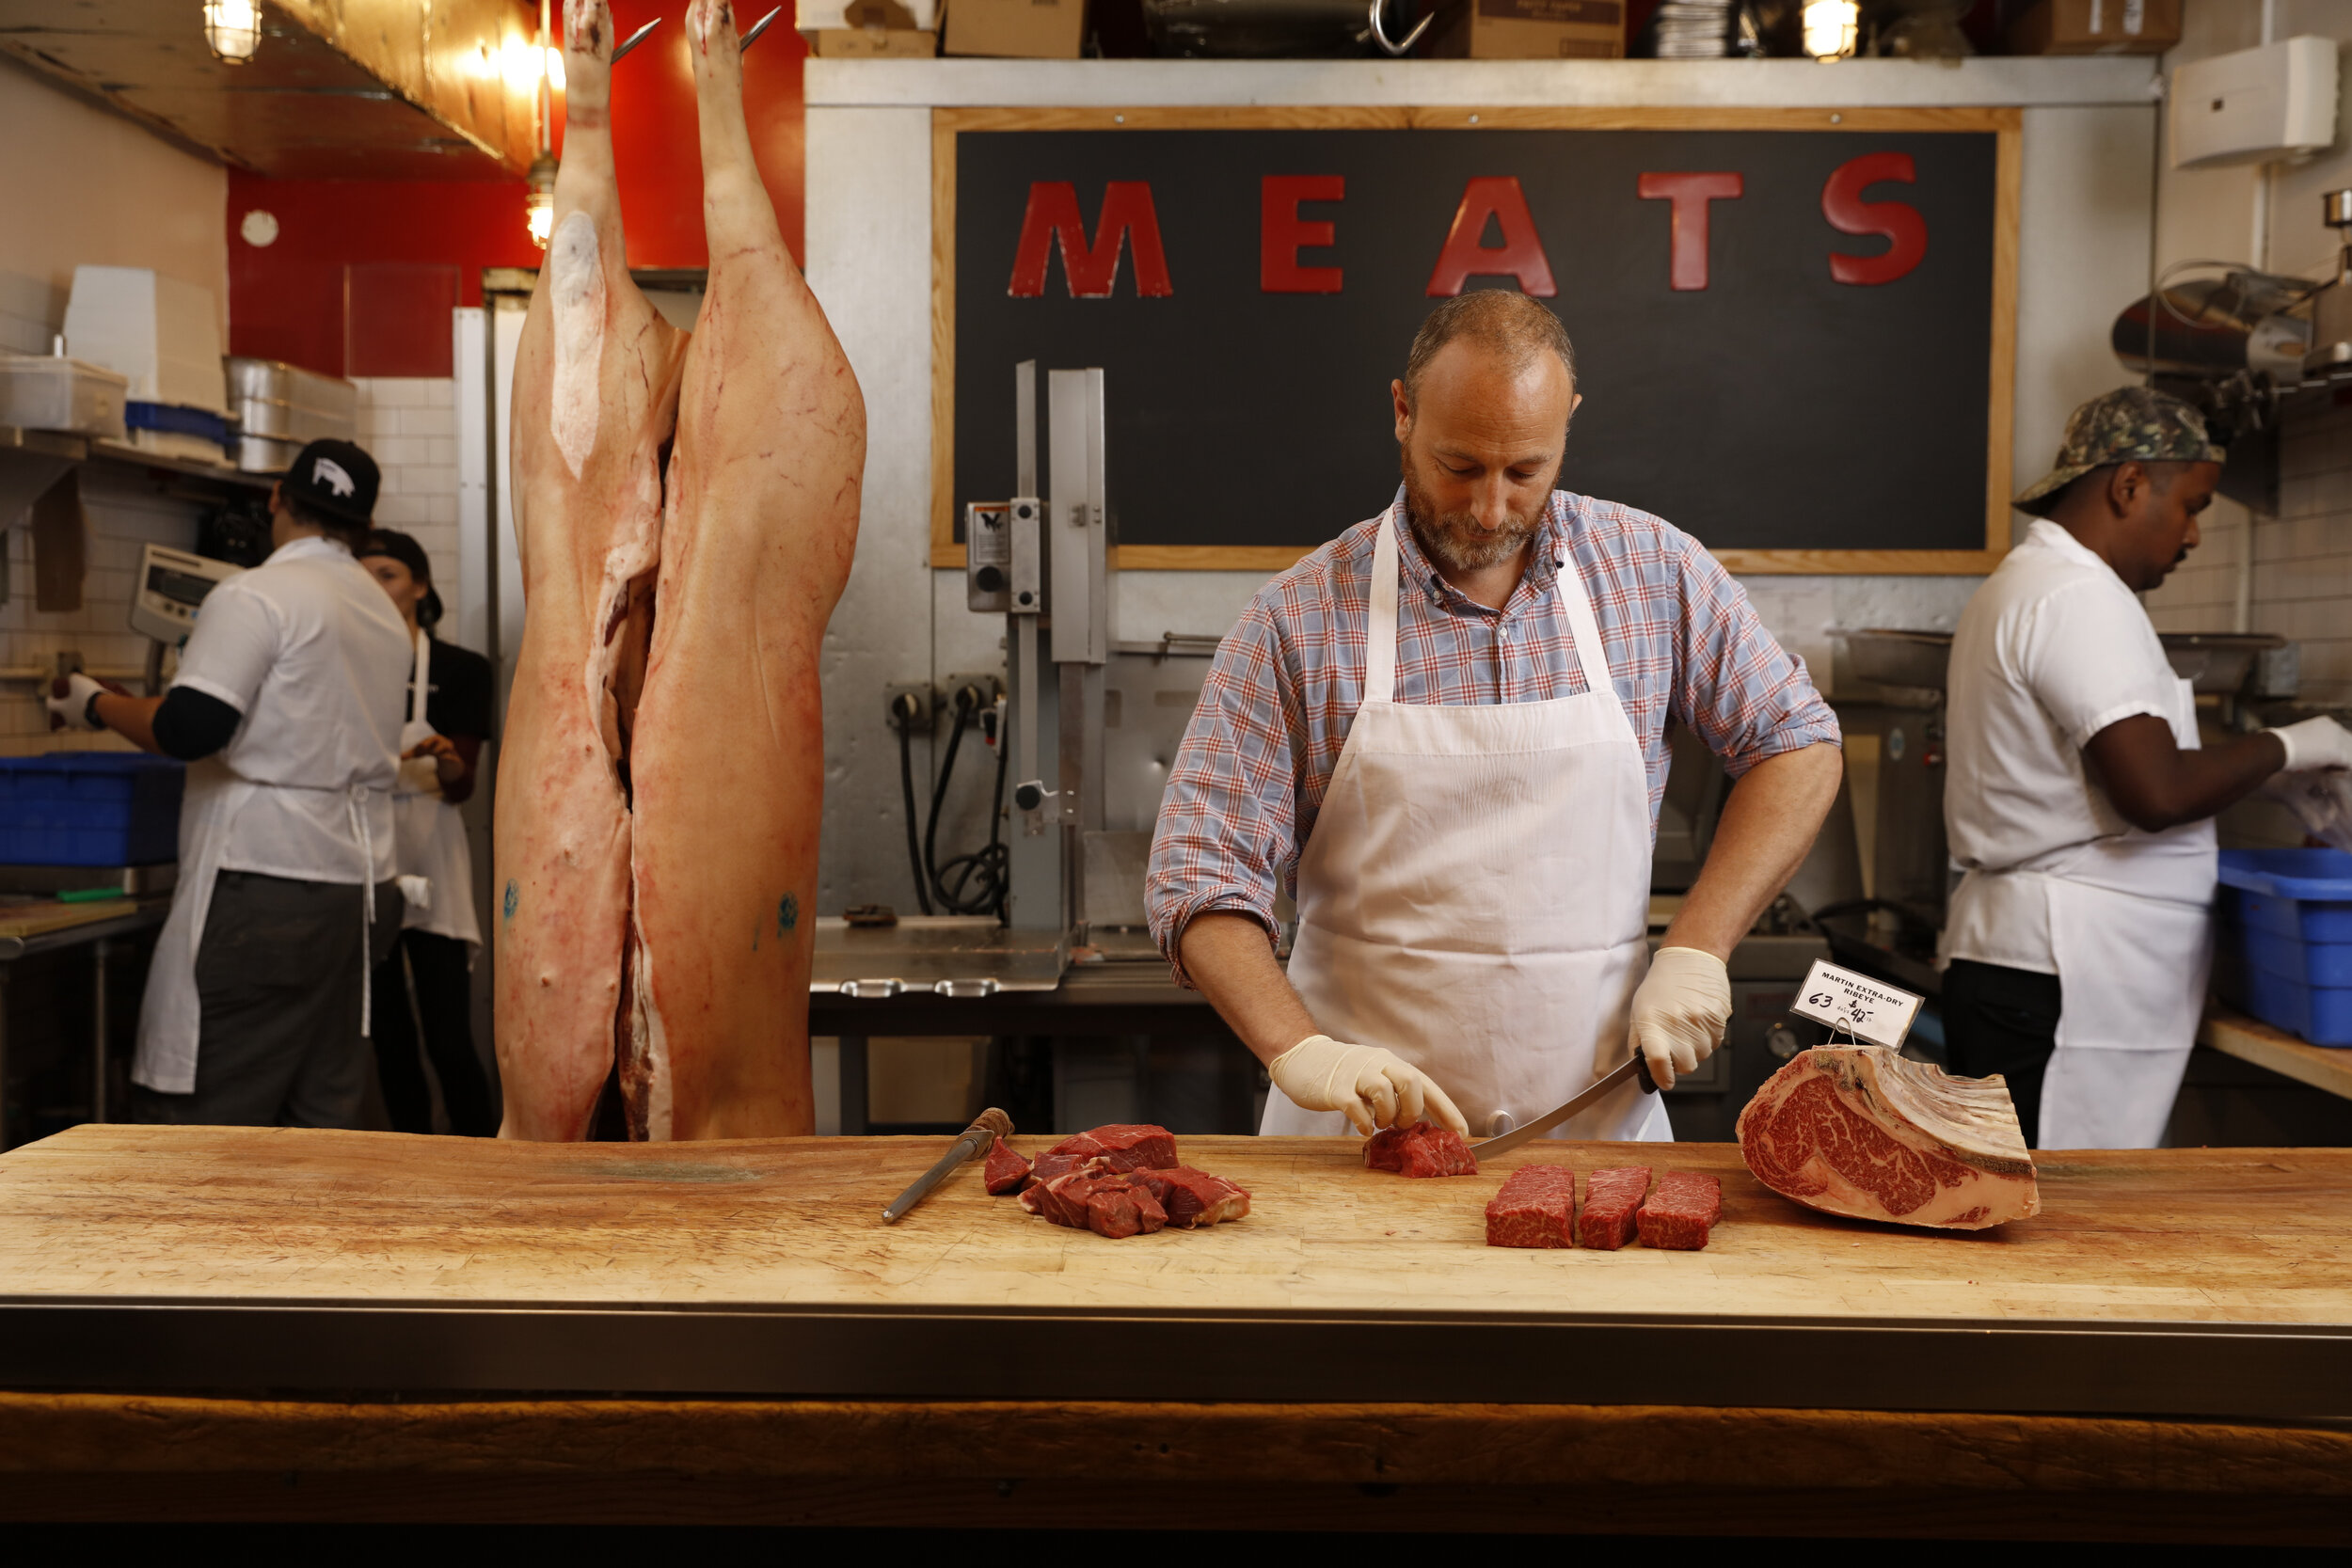 man in apron cutting meat in front of a black chalk board reading "meats"